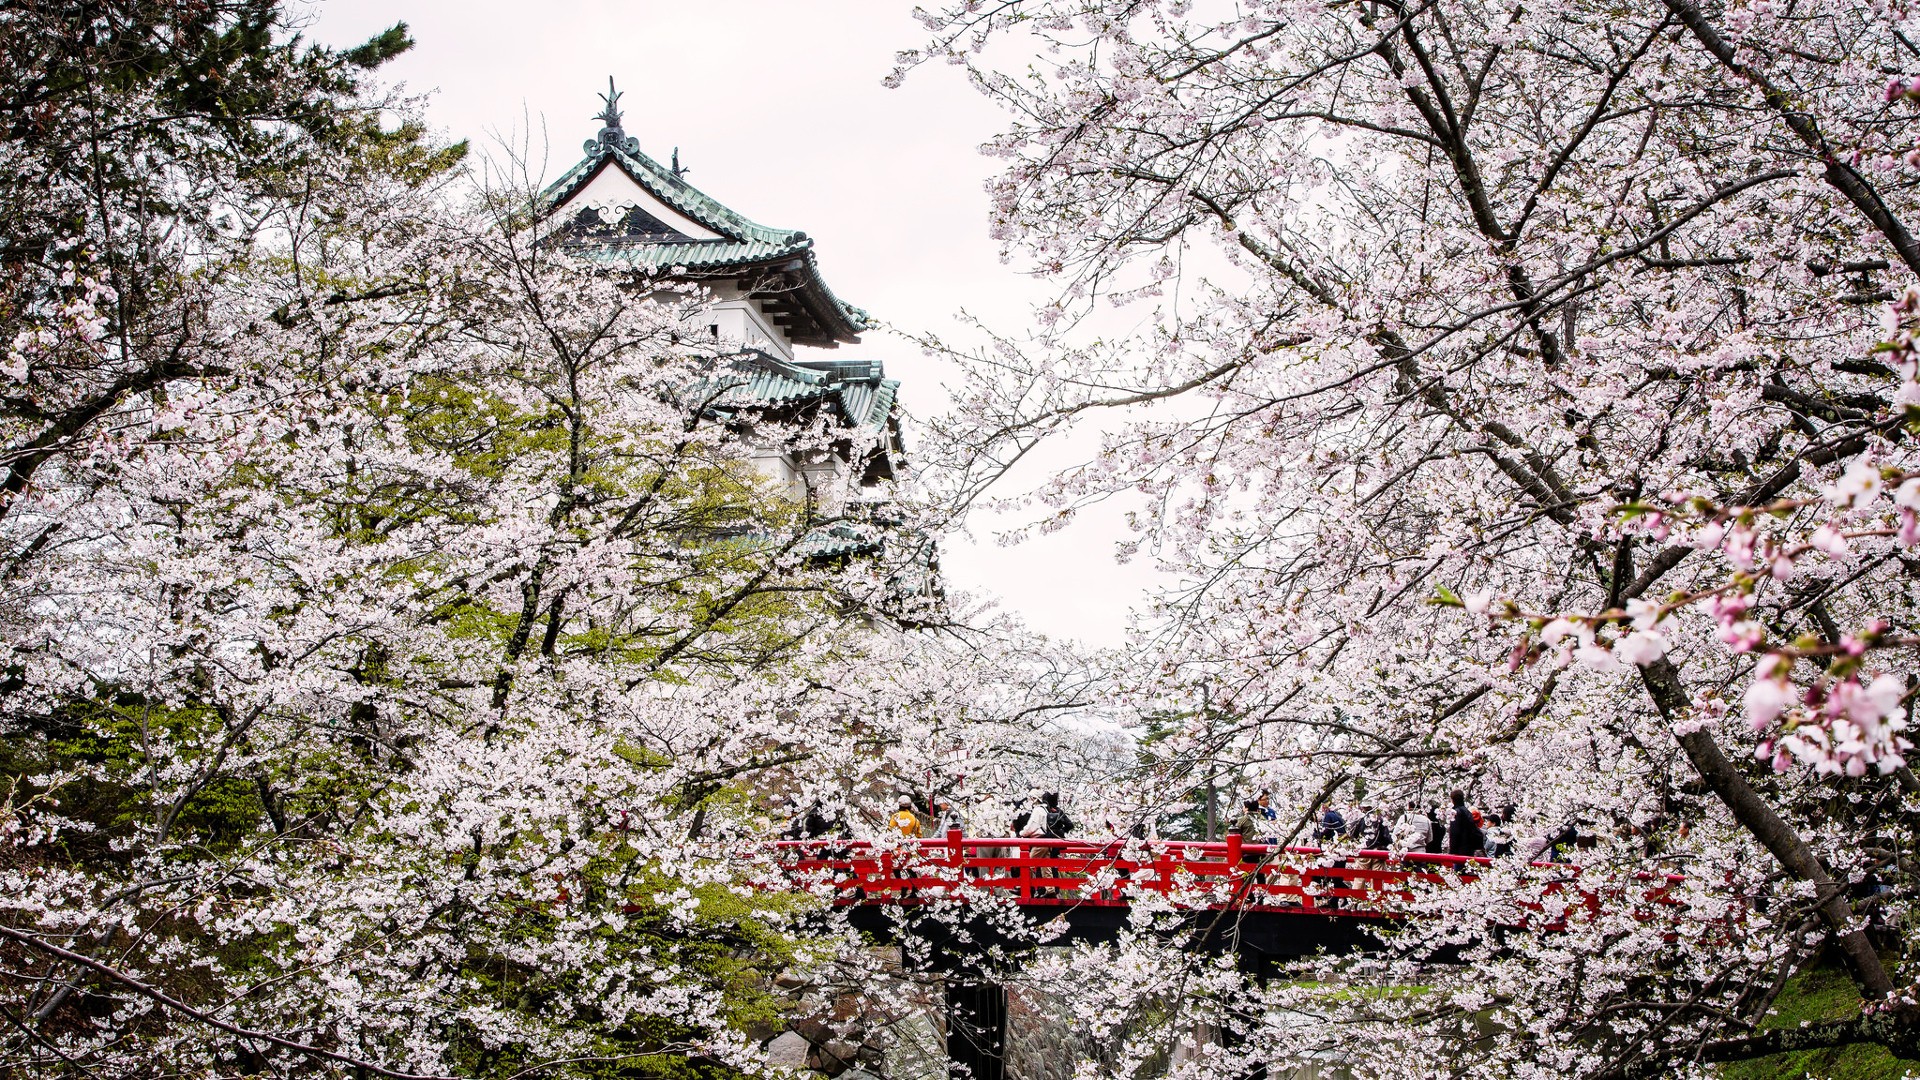 General 1920x1080 Japan castle blossoms spring white flowers trees Asia cherry blossom